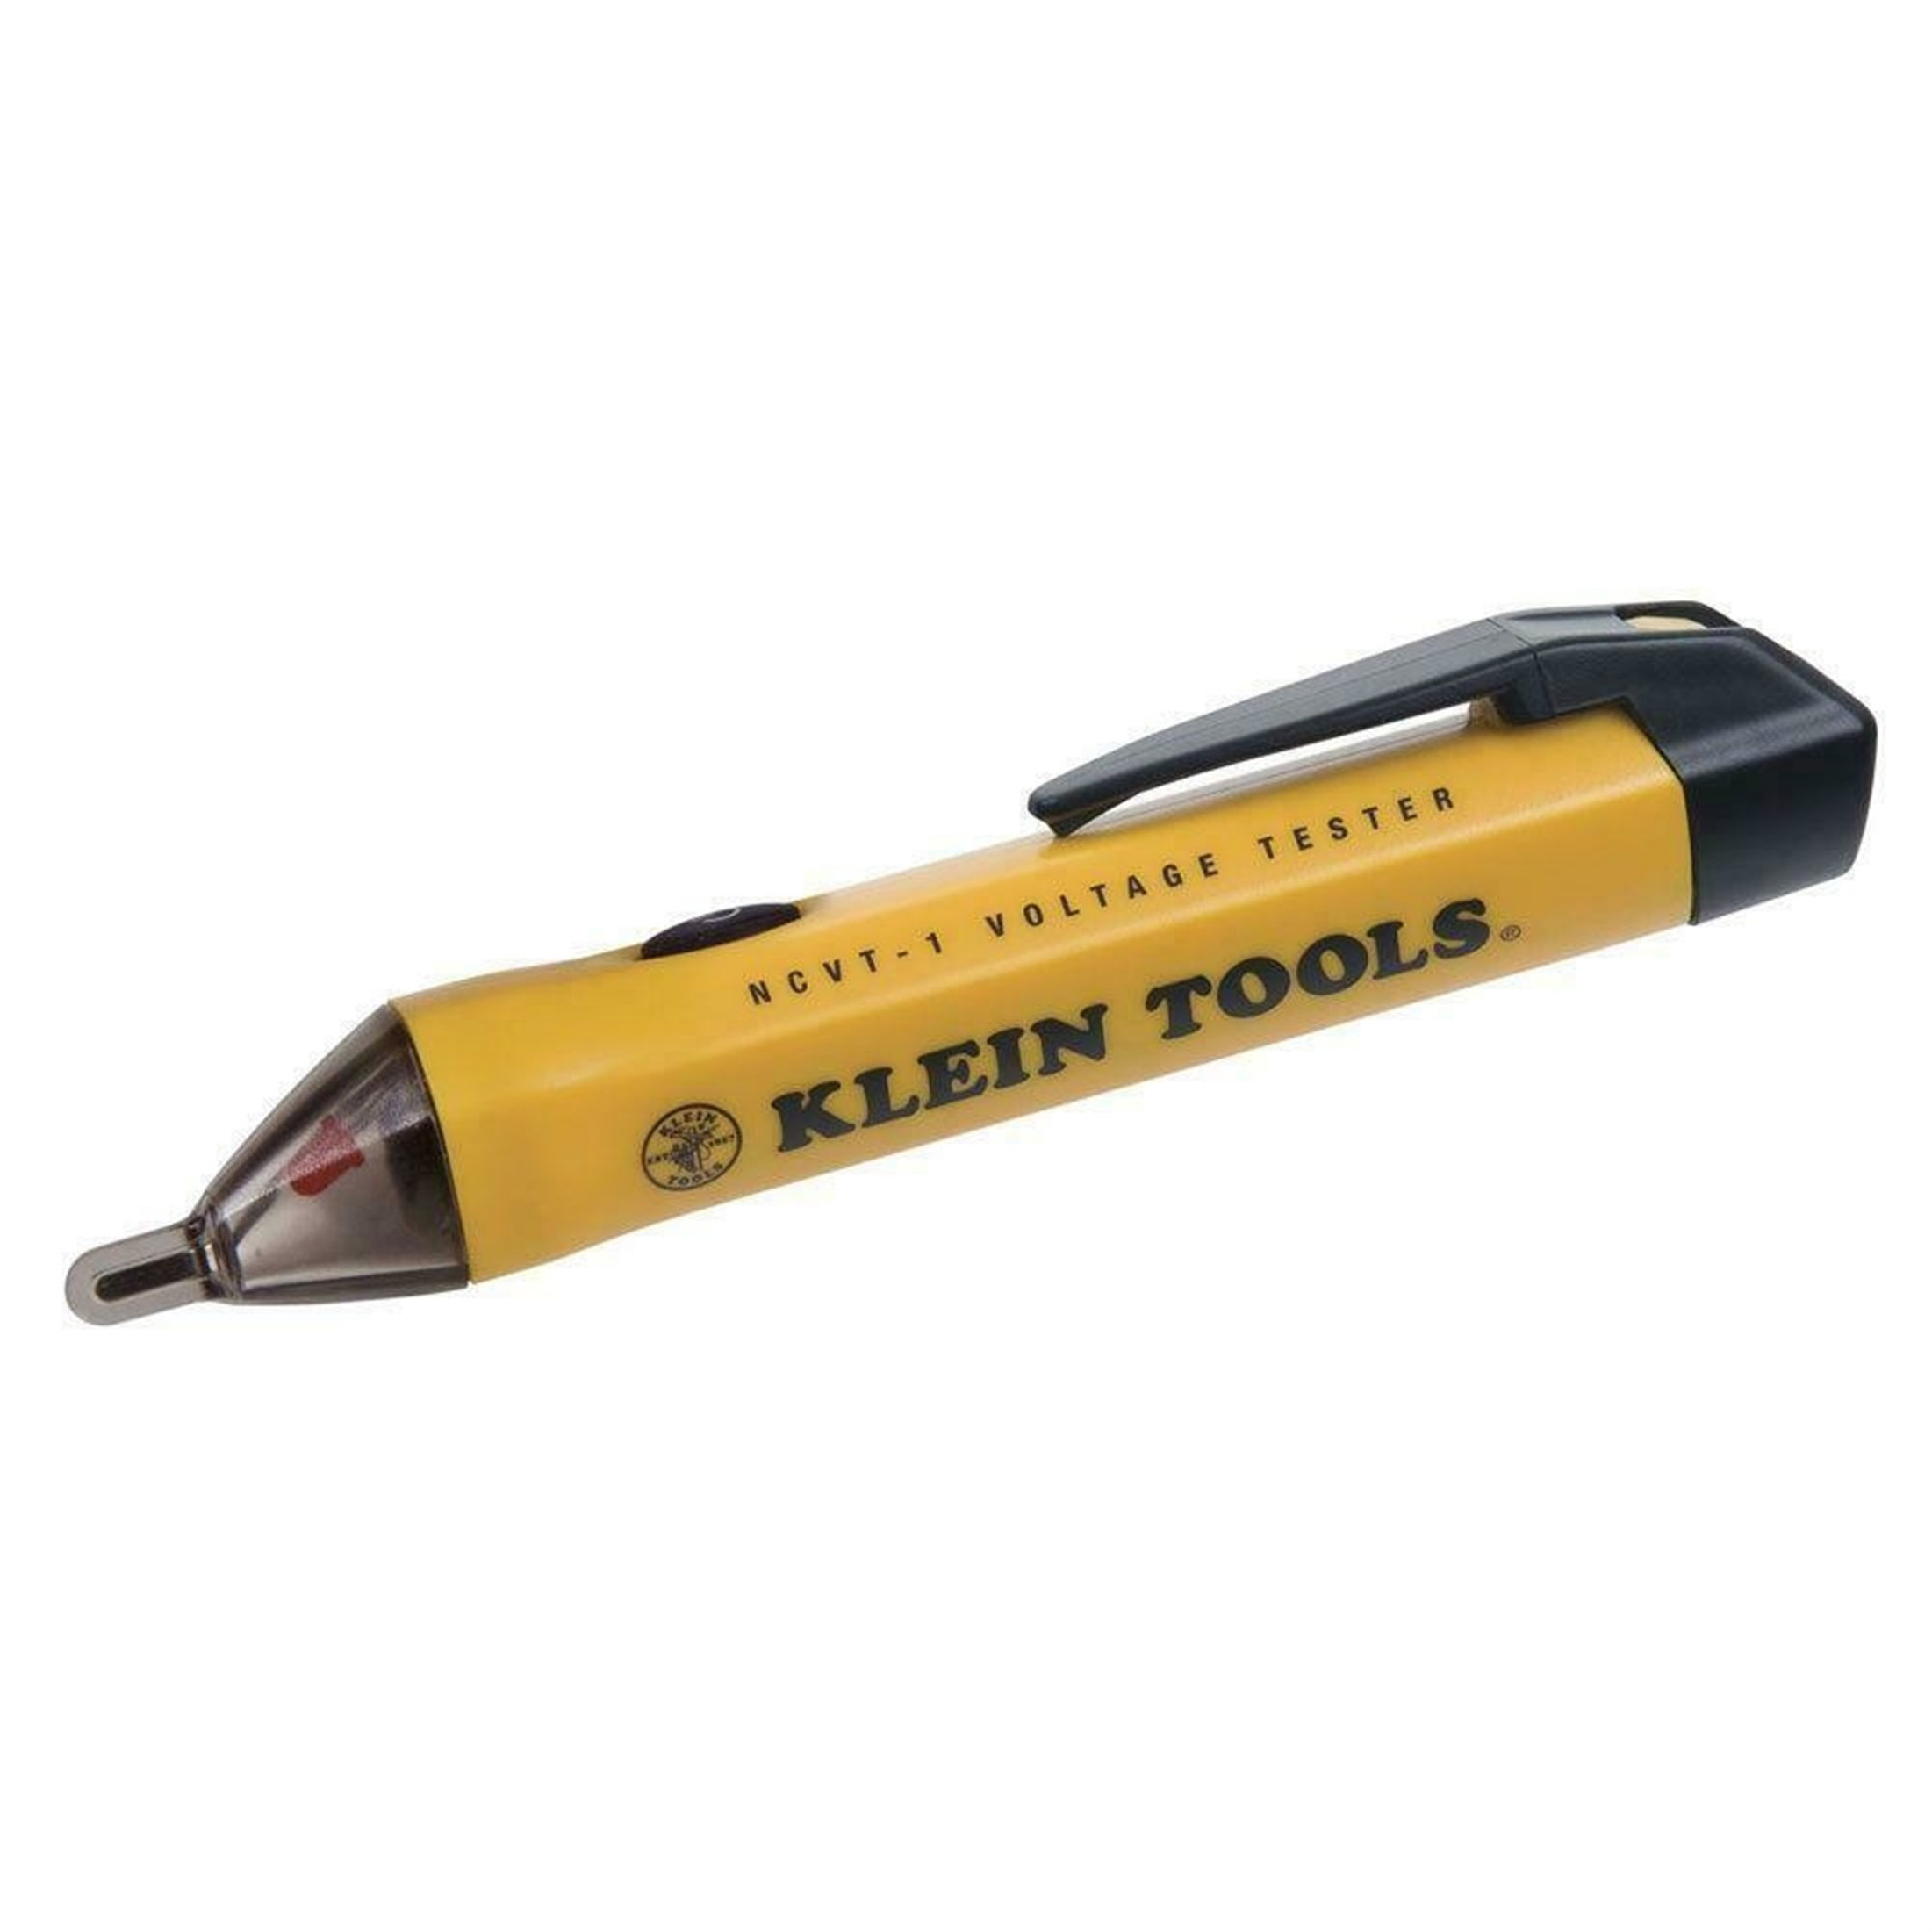 Klein Tools Non-Contact Voltage Tester & Beverage Tool For Electricians